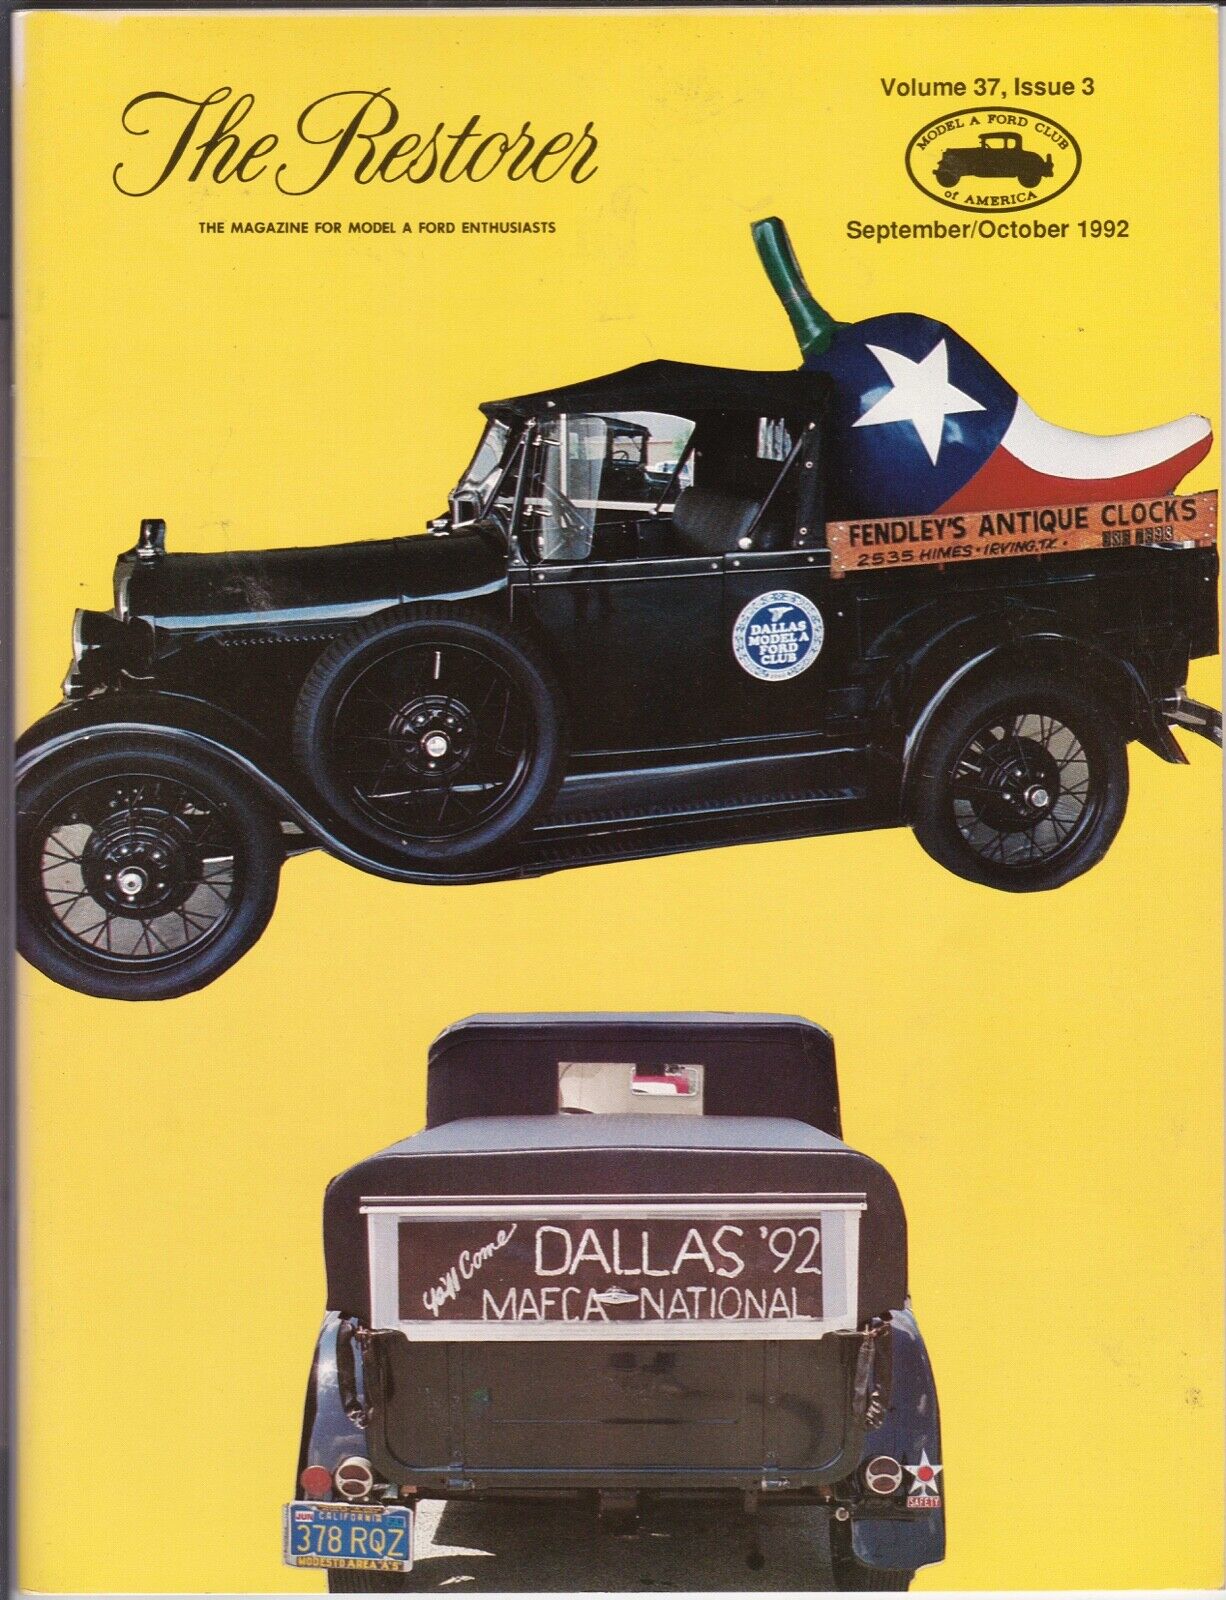 1931 DELUXE FORDOR - THE VINTAGE FORD MAGAZINE - TEXAS, USA 1992 VO.37 #3